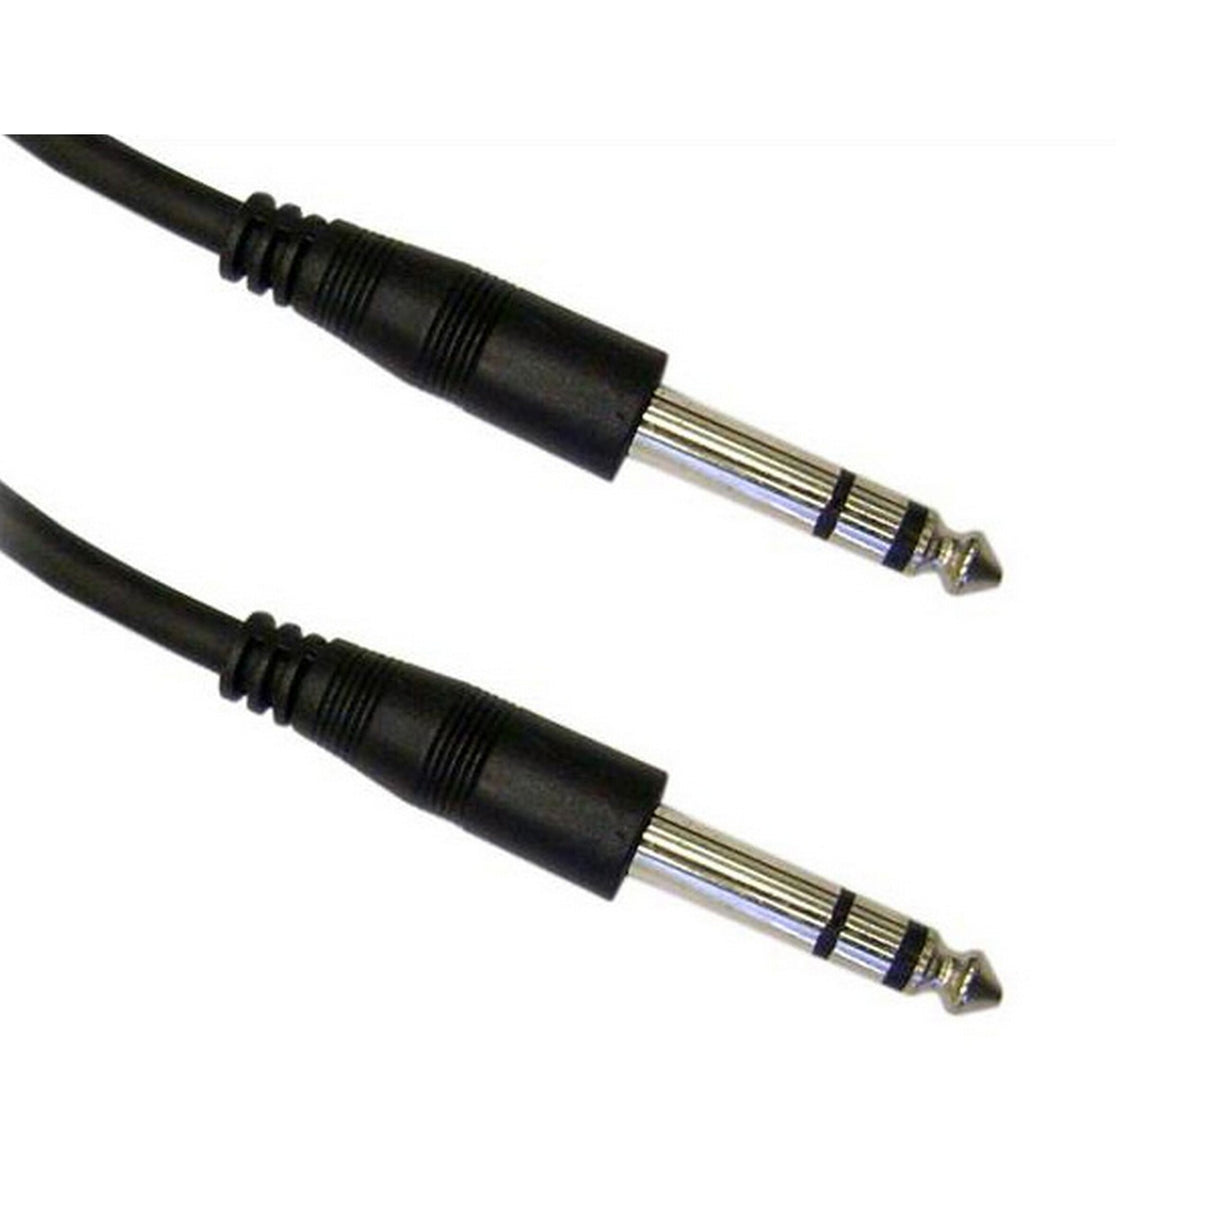 Connectronics 1/4 Inch Stereo Male to Male 1/4 Inch Stereo Molded Audio Cable, 3 Foot